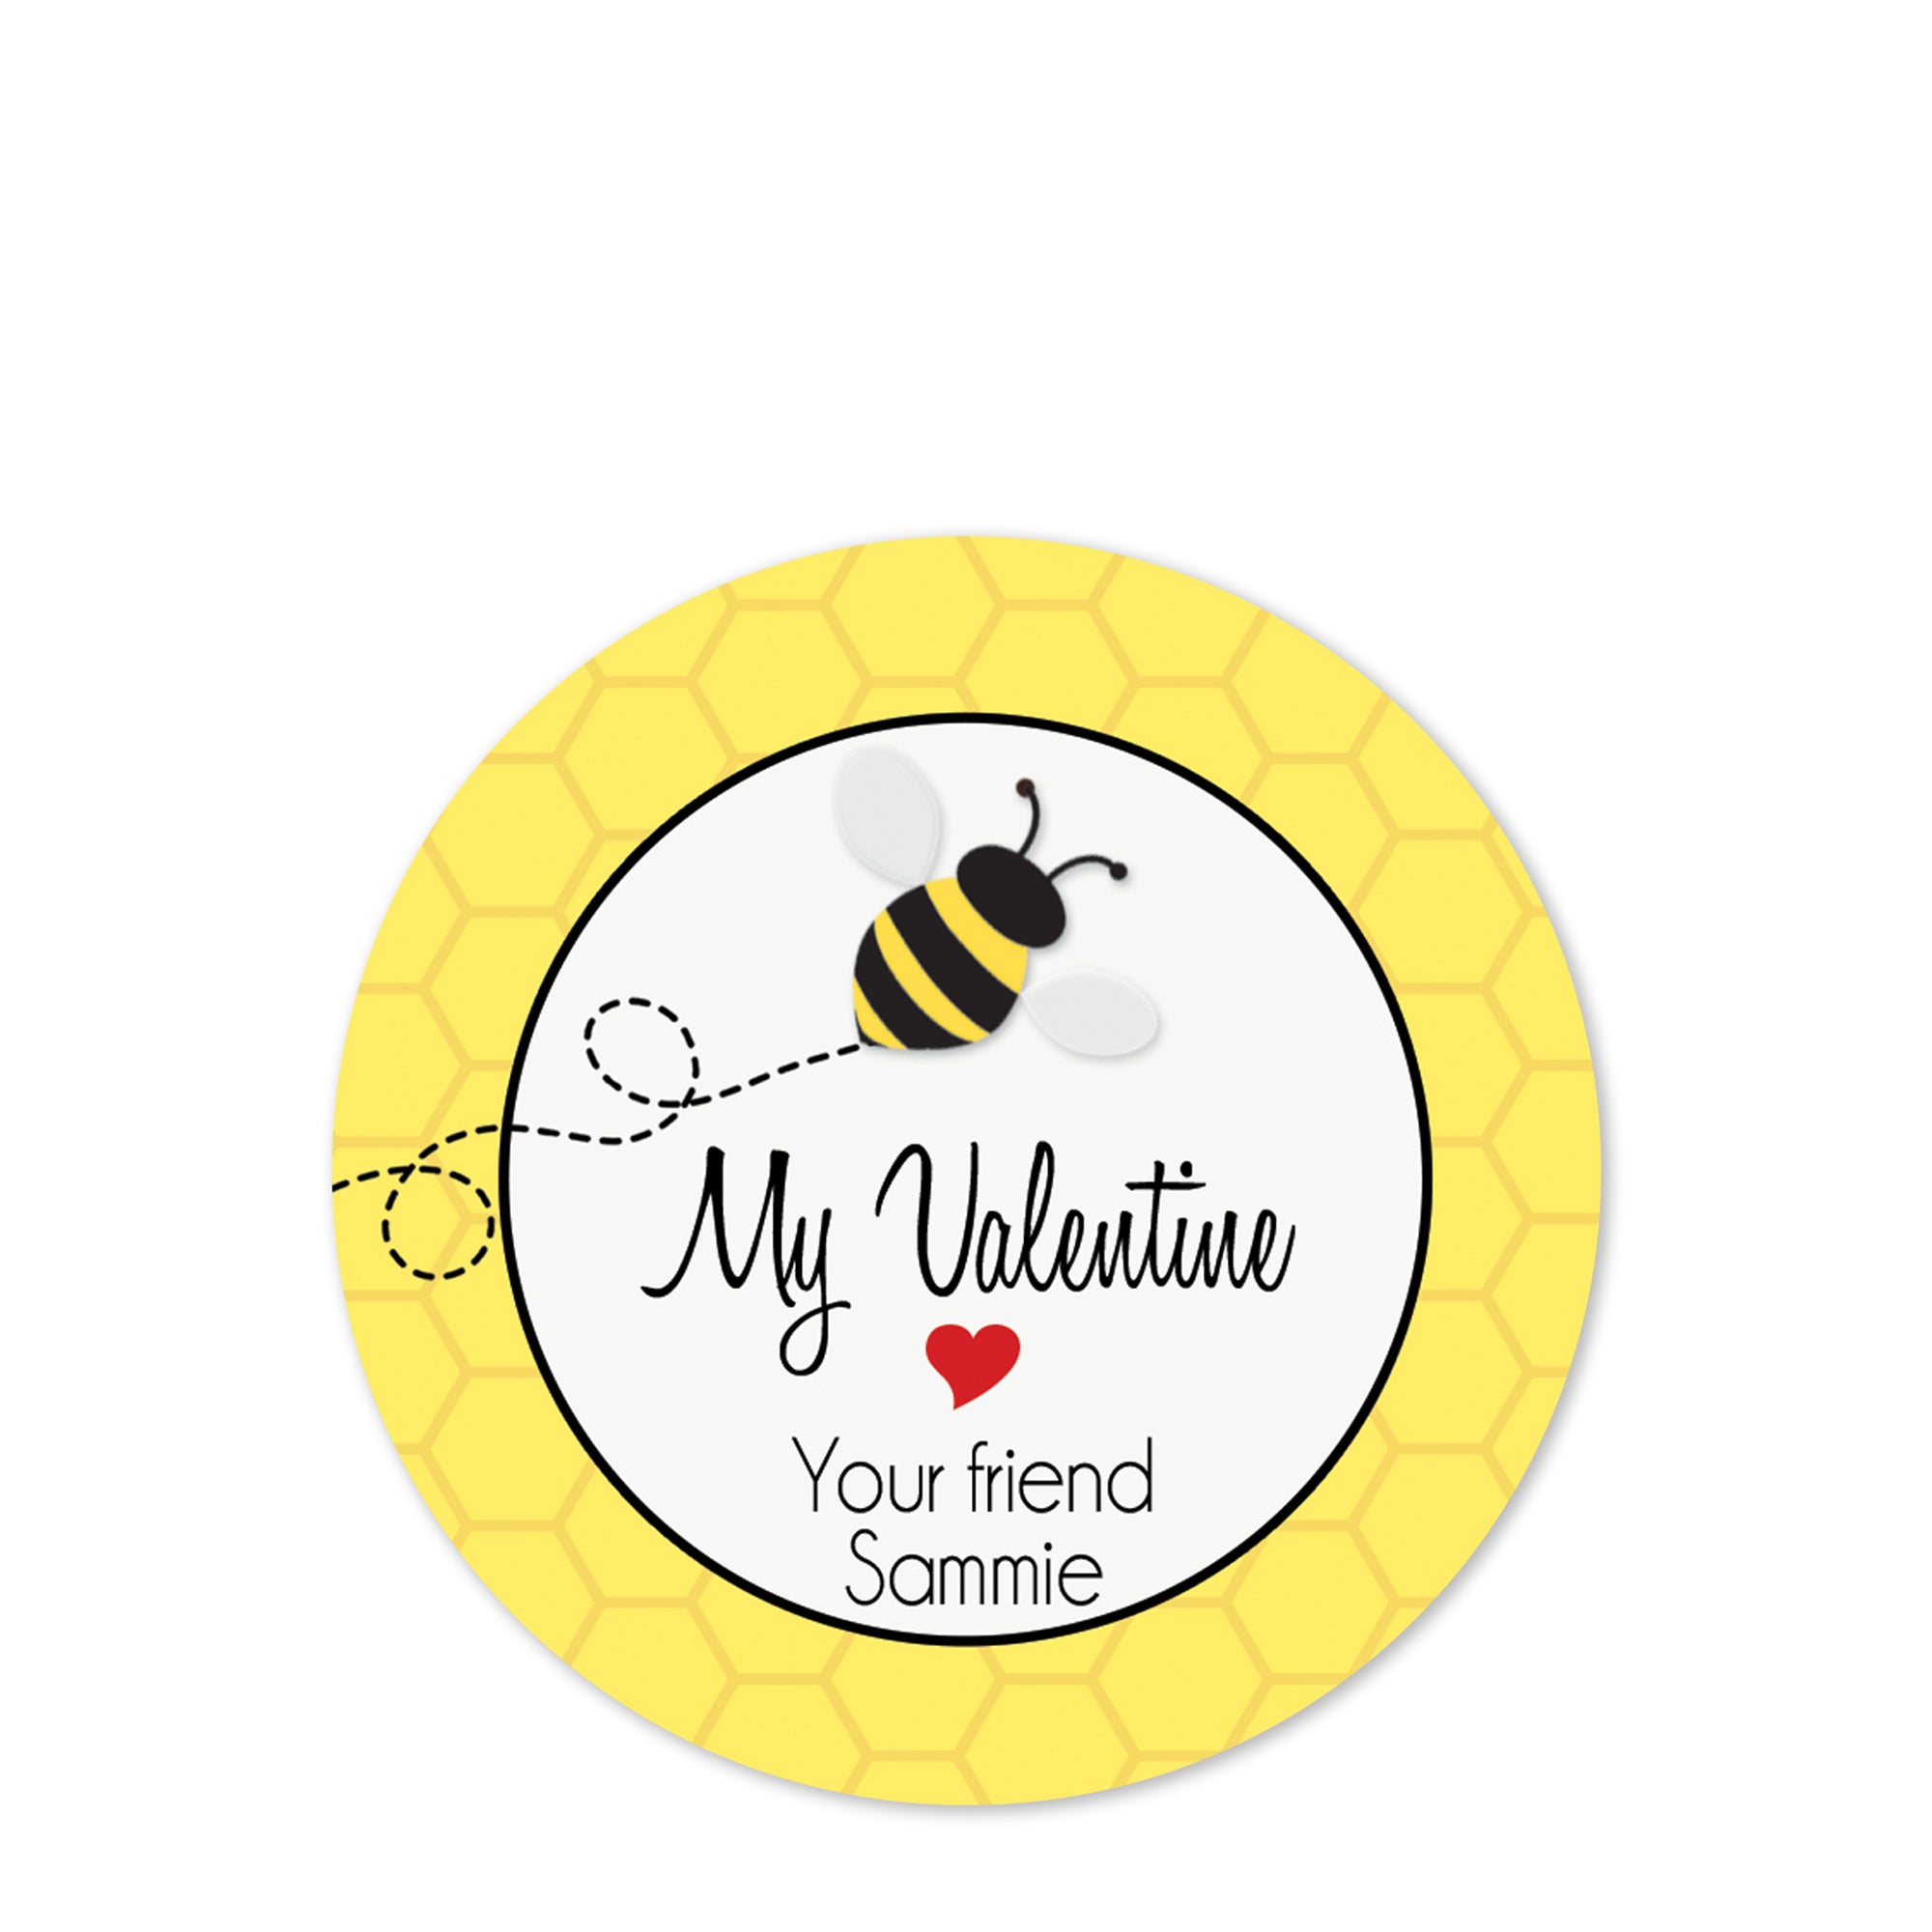 Personalized sticker for treat bags | Valentine's day | PIPSY.COM